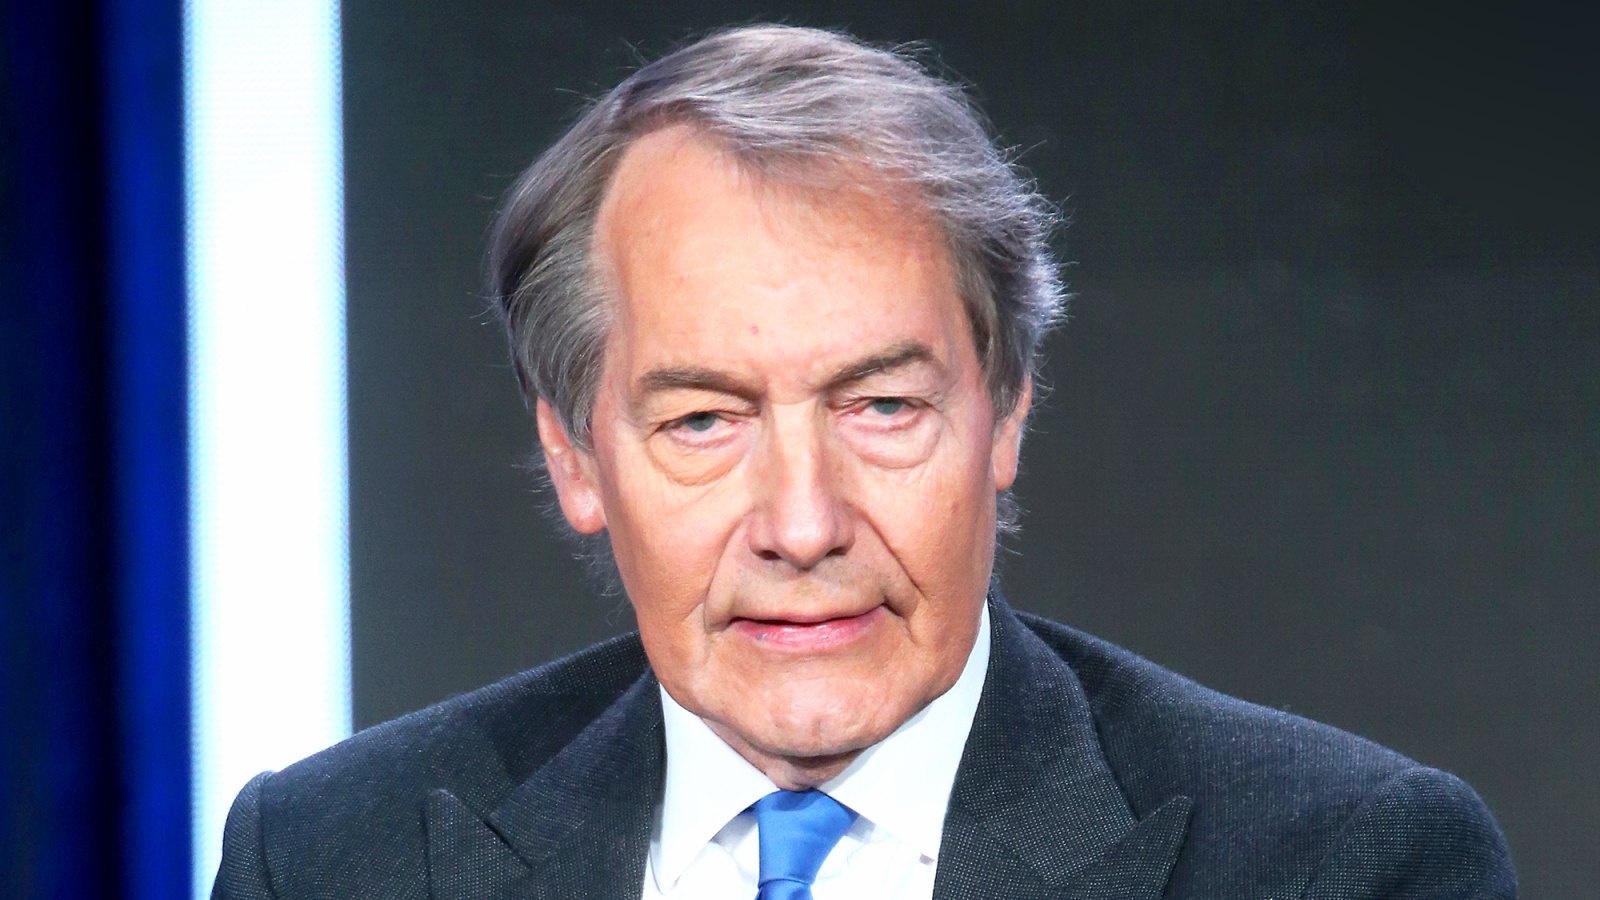 Charlie Rose speaks onstage during the ‘CBS This Morning‘ panel discussion at the 2015 Winter TCA Tour in Pasadena, California.